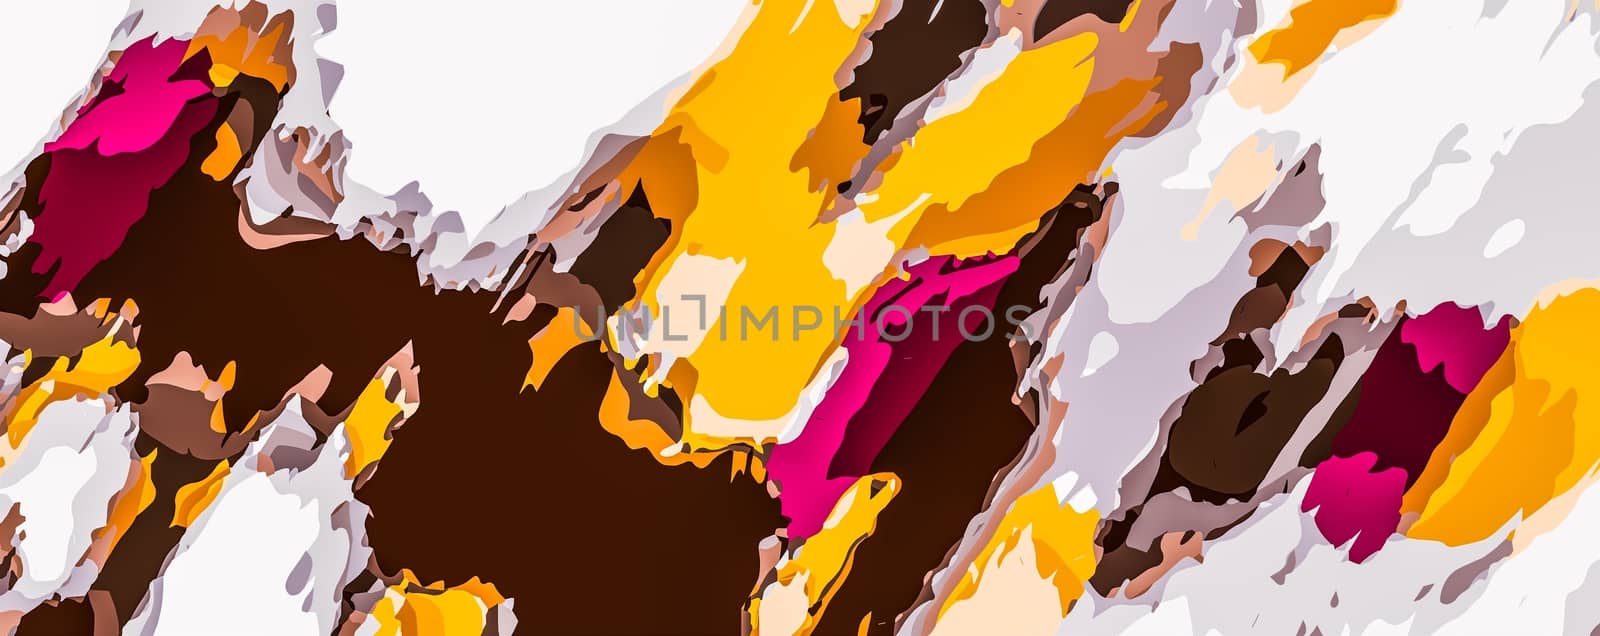 yellow brown and pink painting abstract background by Timmi